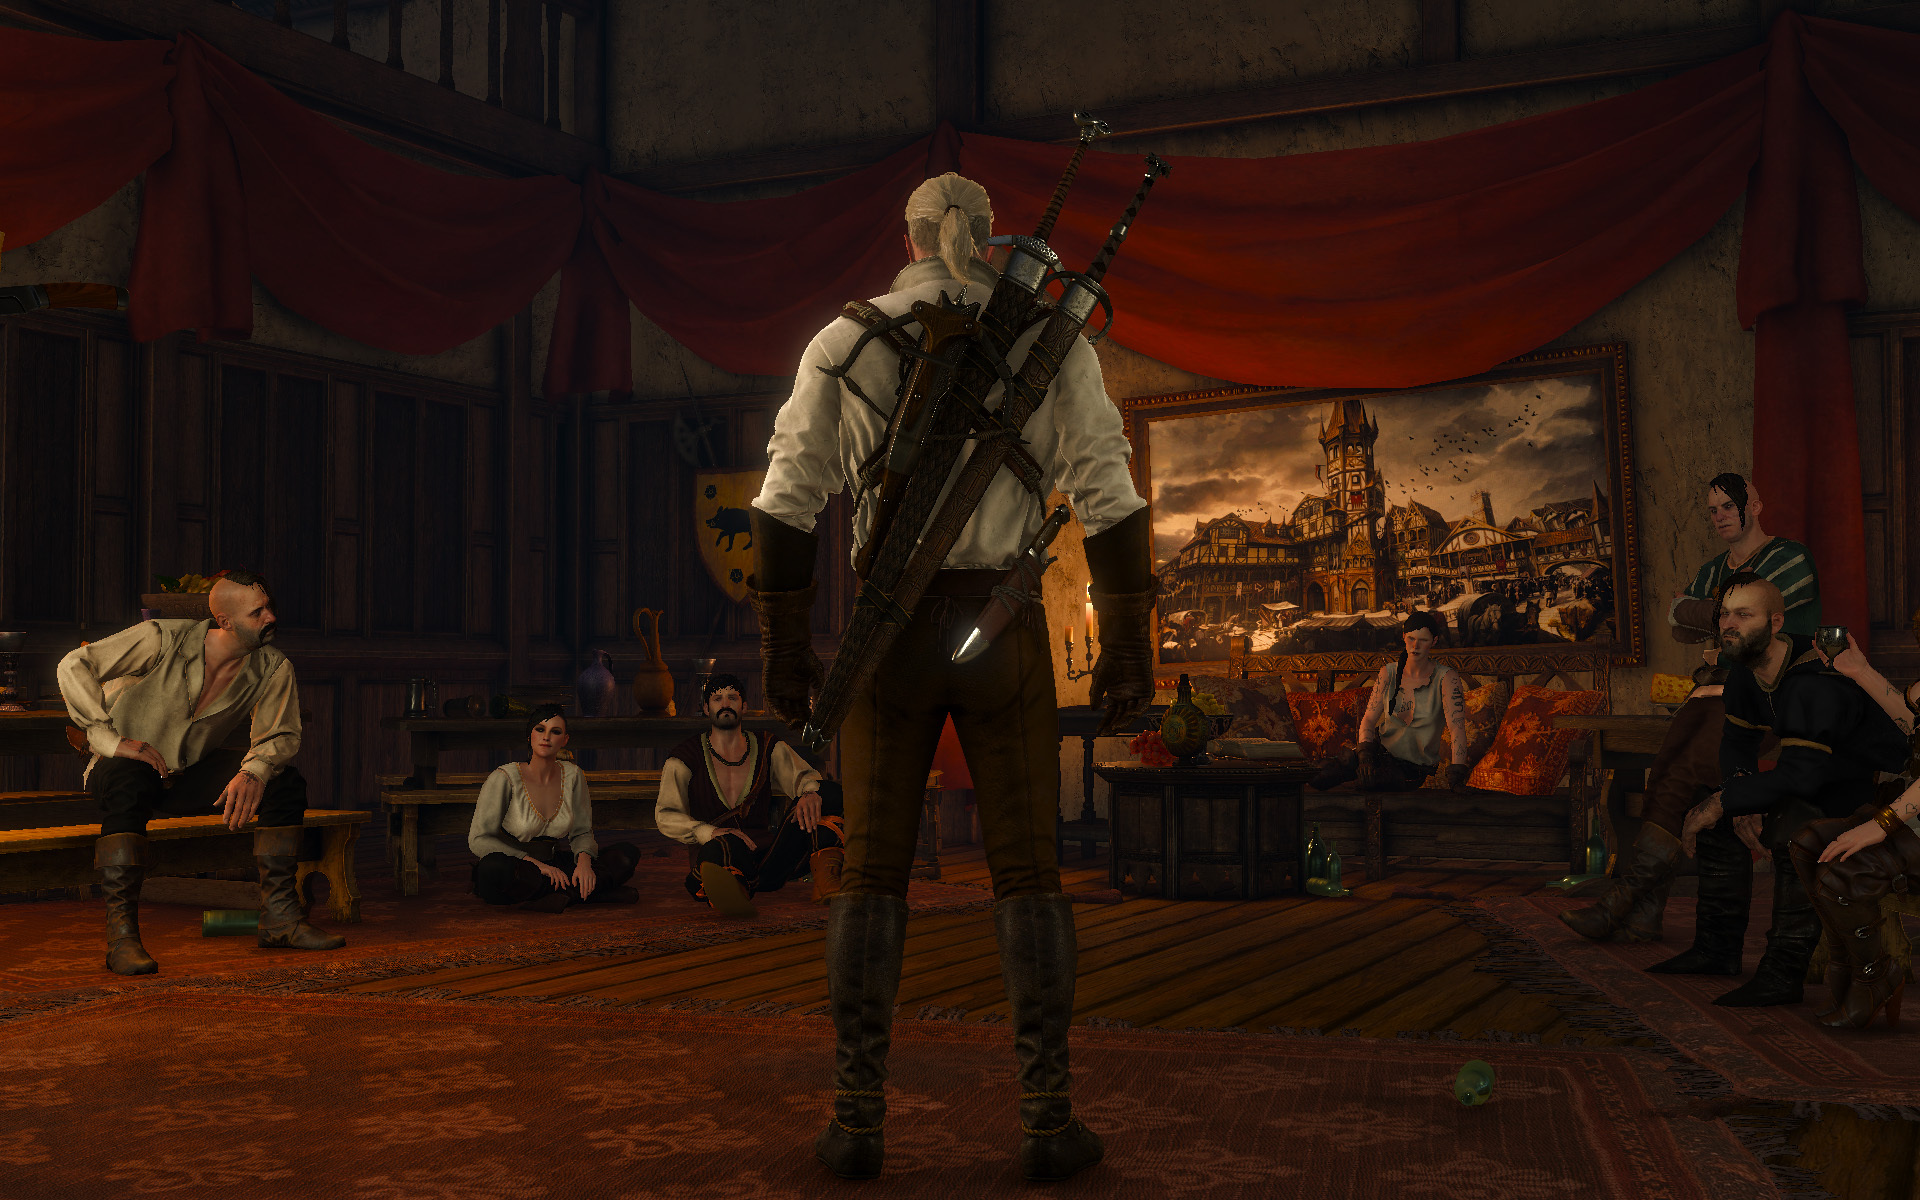 The play quest witcher 3 фото 53